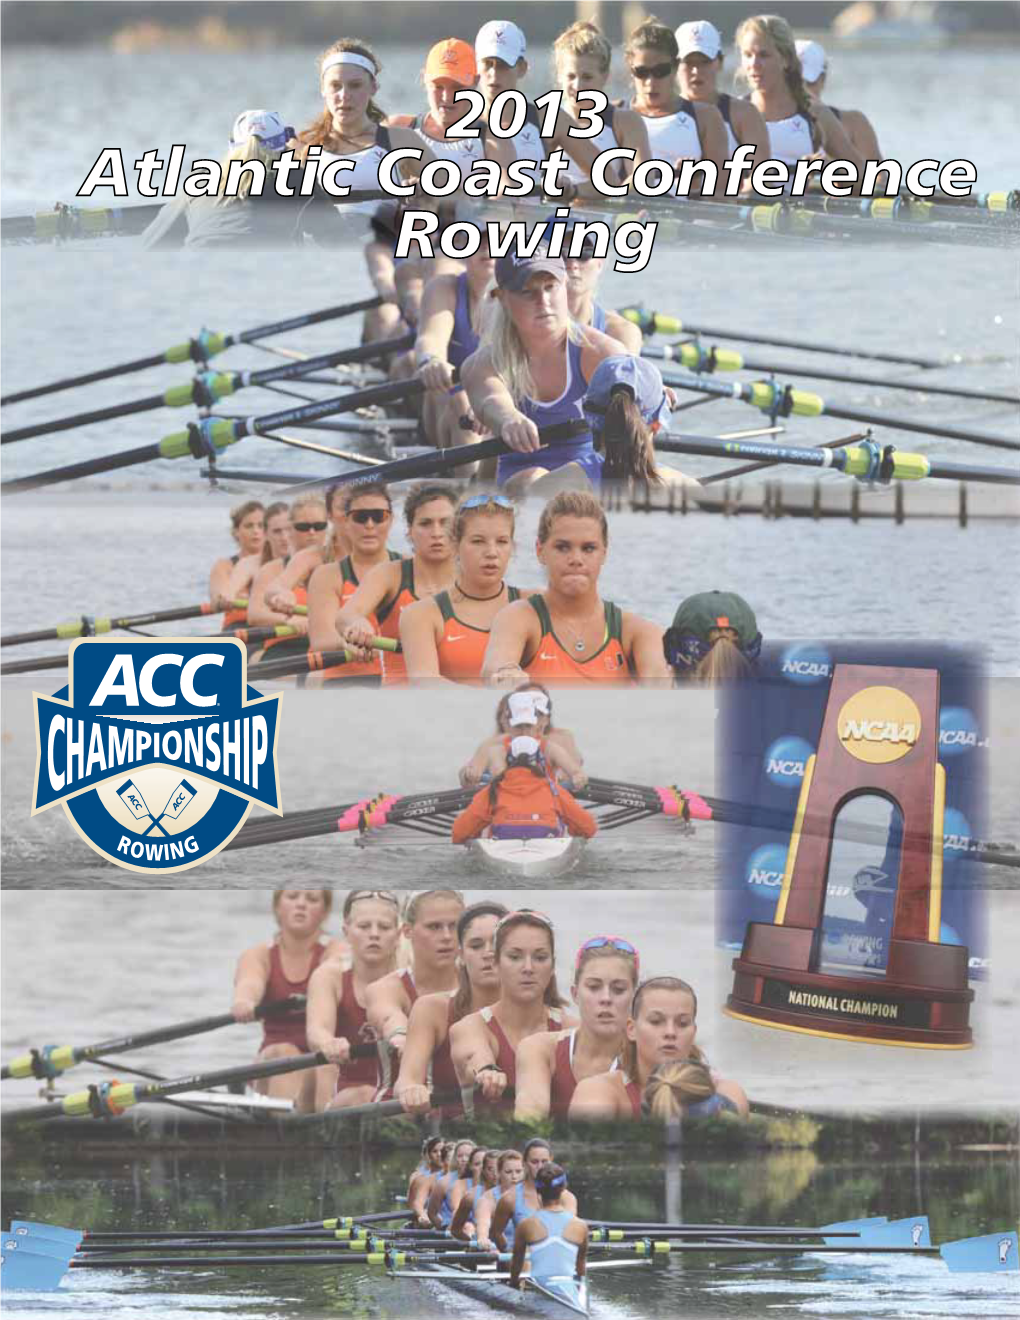 Virginia Captures NCAA Rowing Championship Cavaliers Claim First ACC National Rowing Title Clemson Earned 15Th-Place National Finish May 30, 2010 GOLD RIVER, Calif